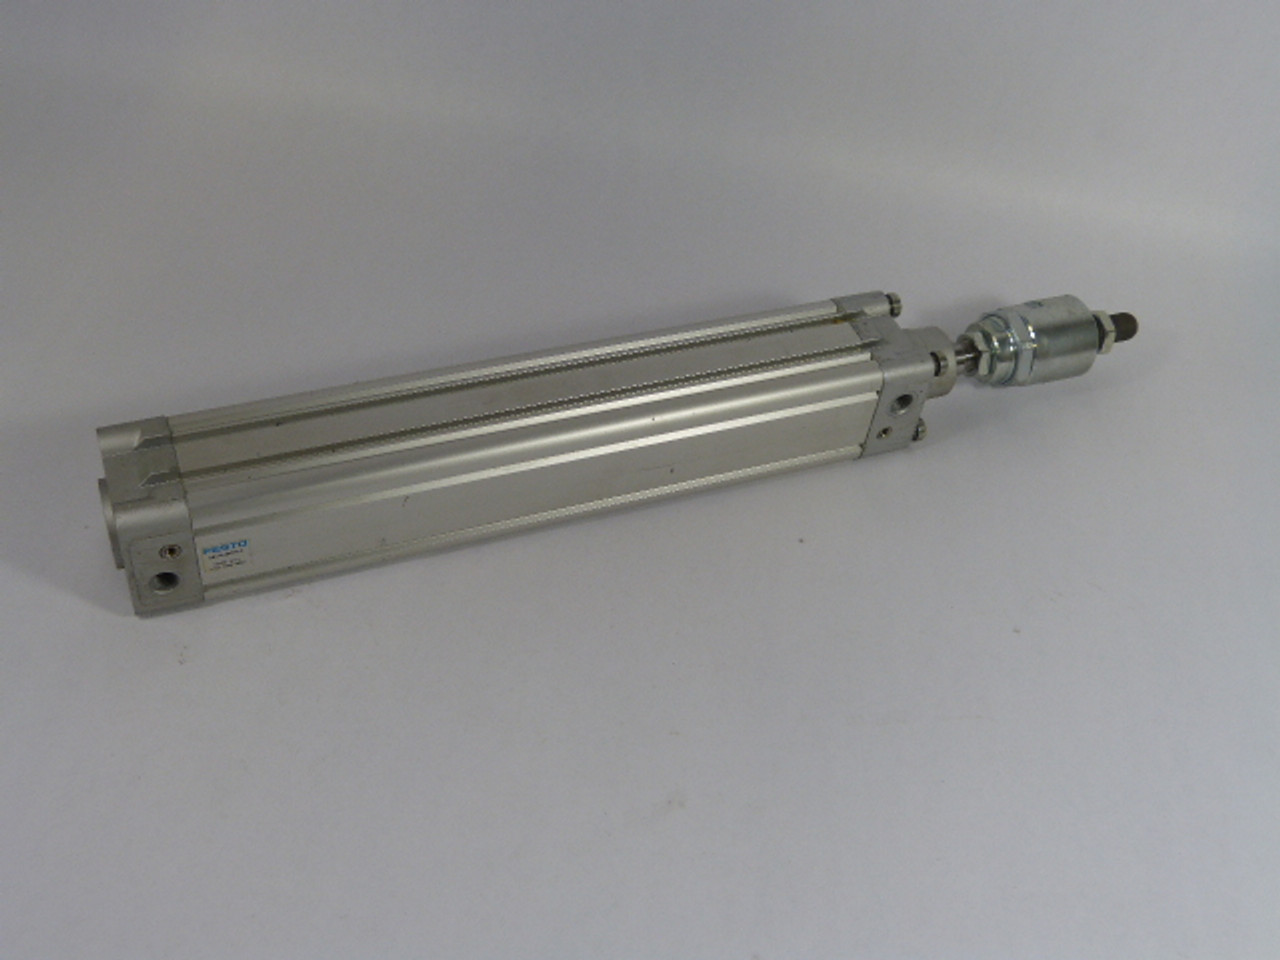 Festo DNC-50-280-PPV-A 163366 Pneumatic Cylinder 50mm Bore 280 Stroke USED